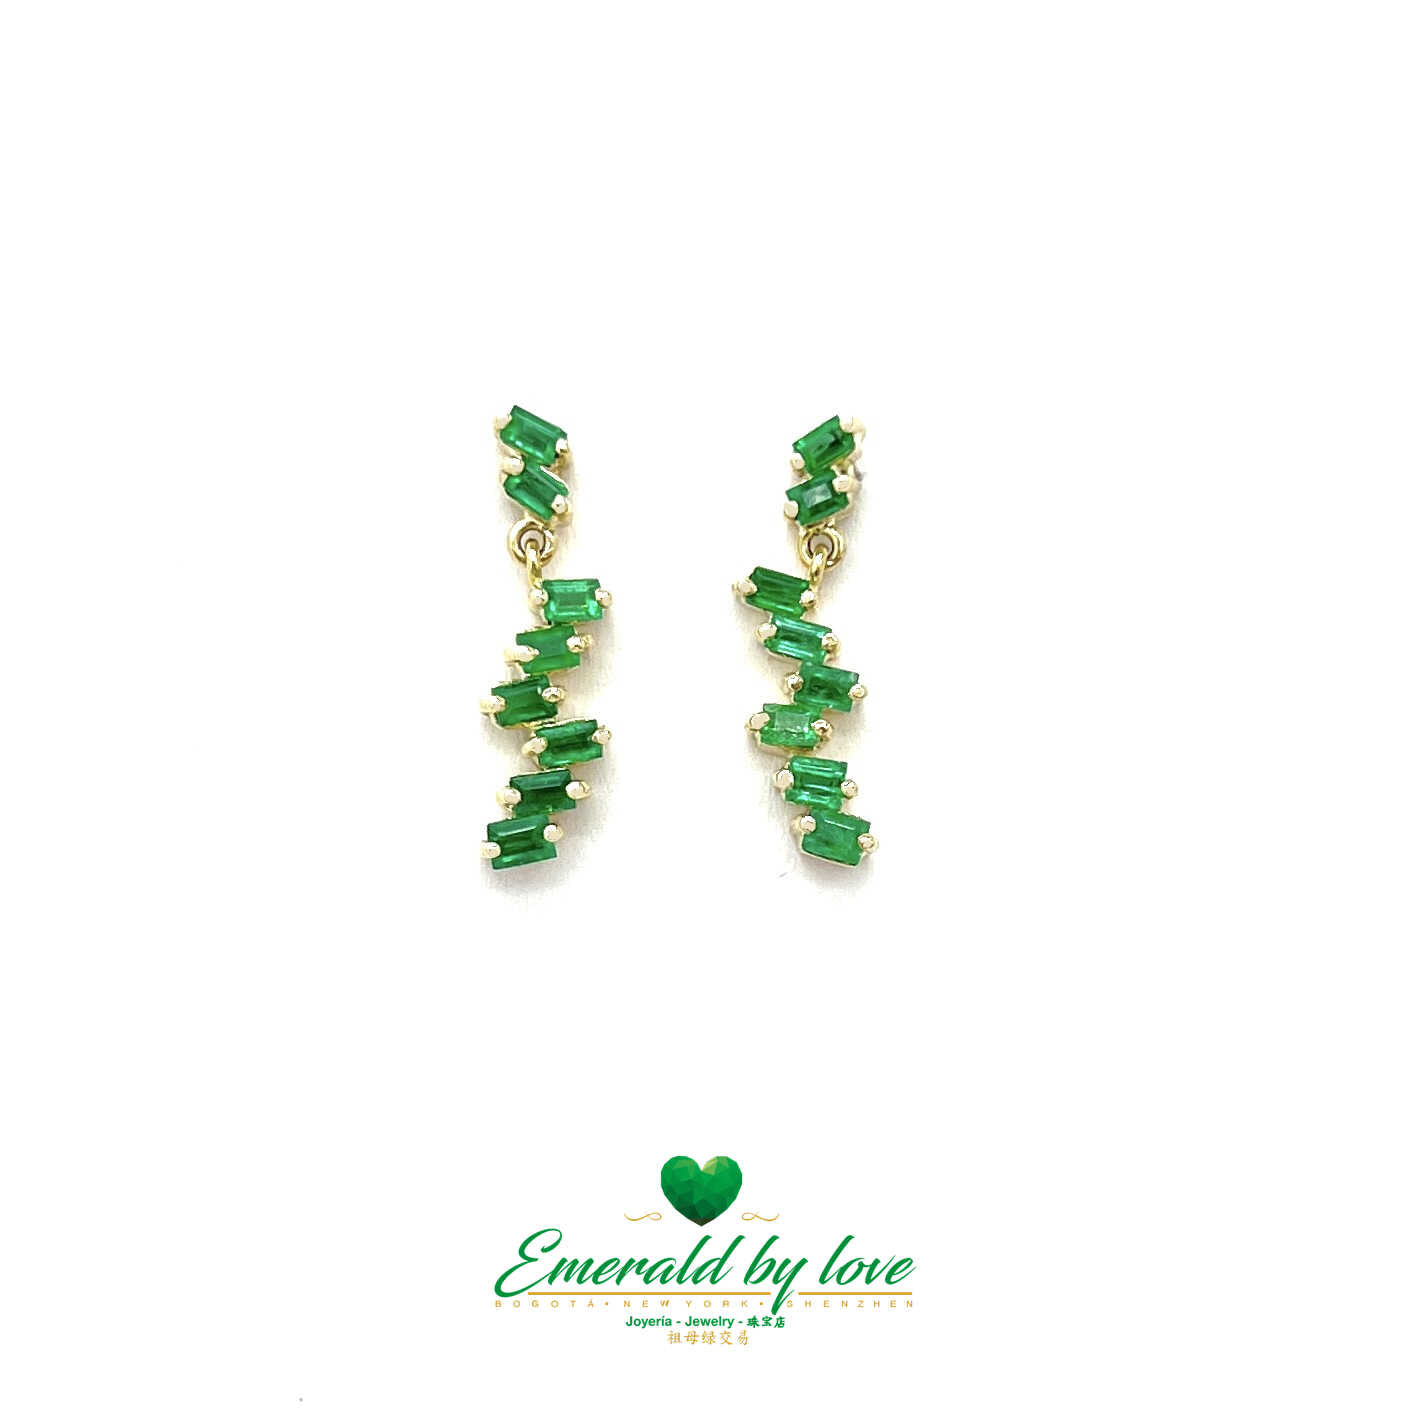 Golden Gleam: 18K Yellow Gold Earrings with Approximate 1.0 TCW Baguette Emeralds